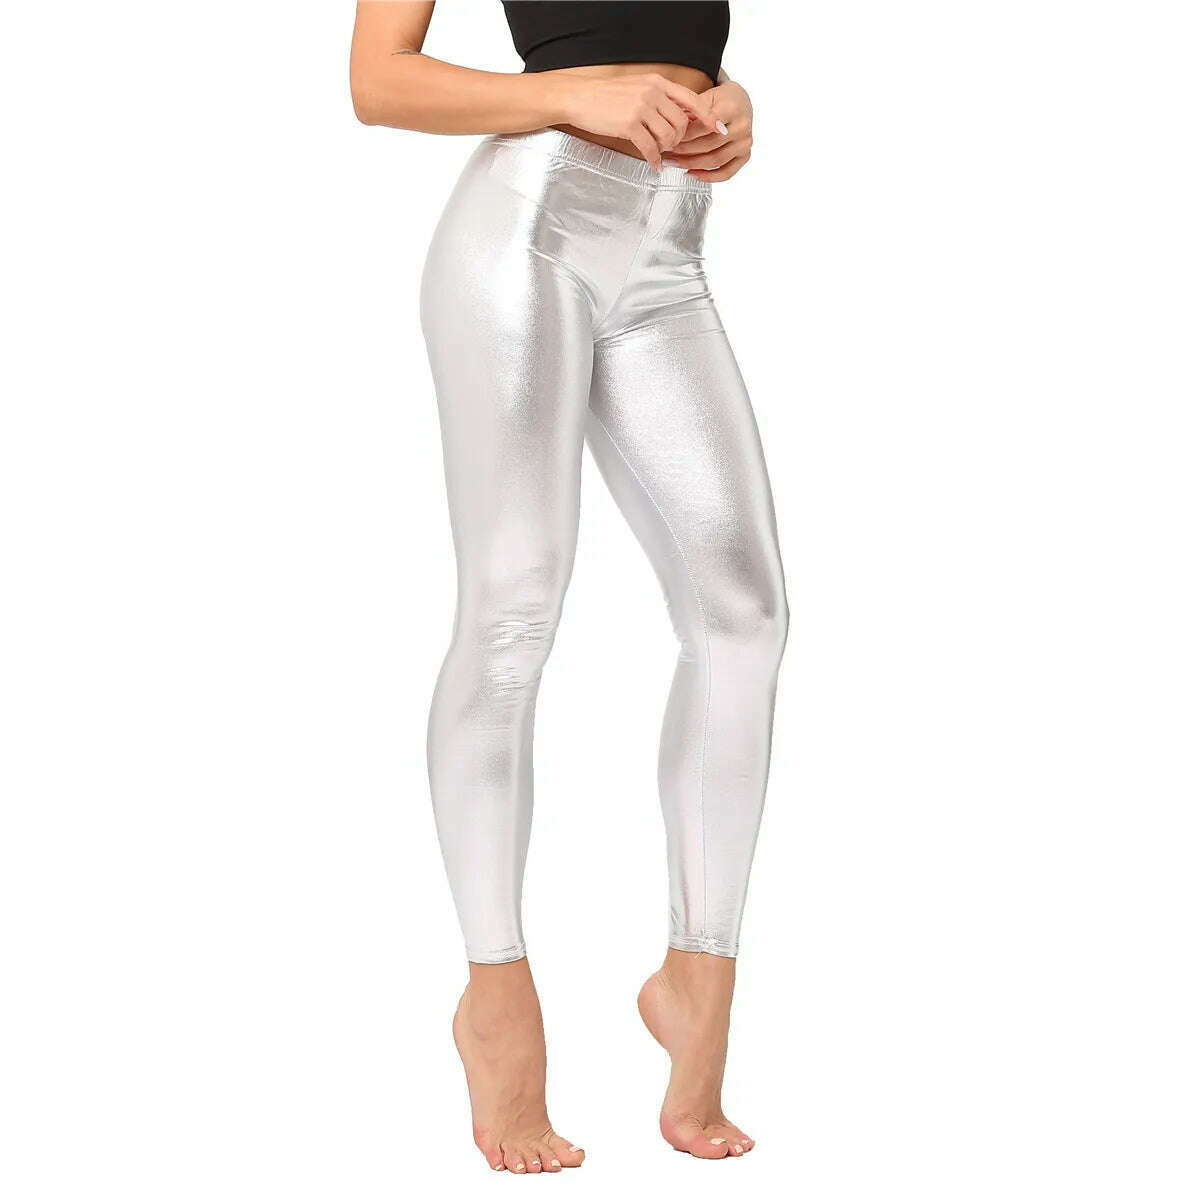 KIMLUD, Metallic Color PU Leggings Women Faux Leather Pants Dancing Party Pant Sexy Night Club Skinny Costume Pants Tight Trousers, Silver / One size 50kg below, KIMLUD Womens Clothes